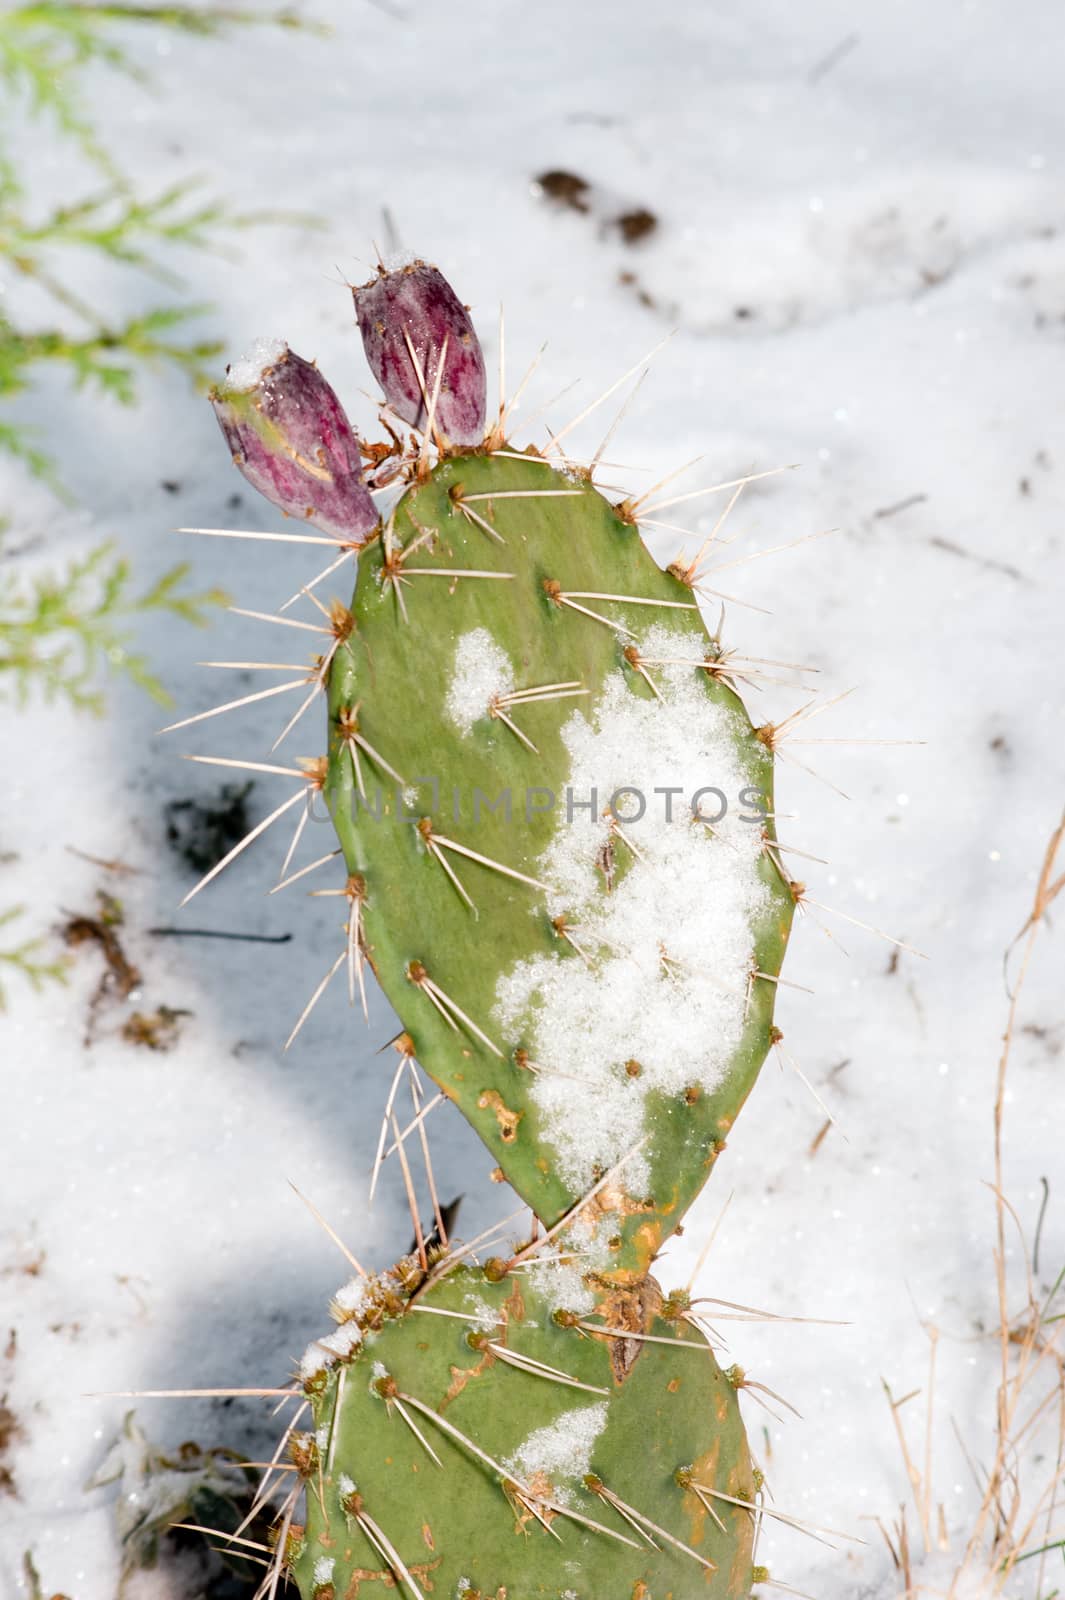 The cactus in the winter. by dadalia